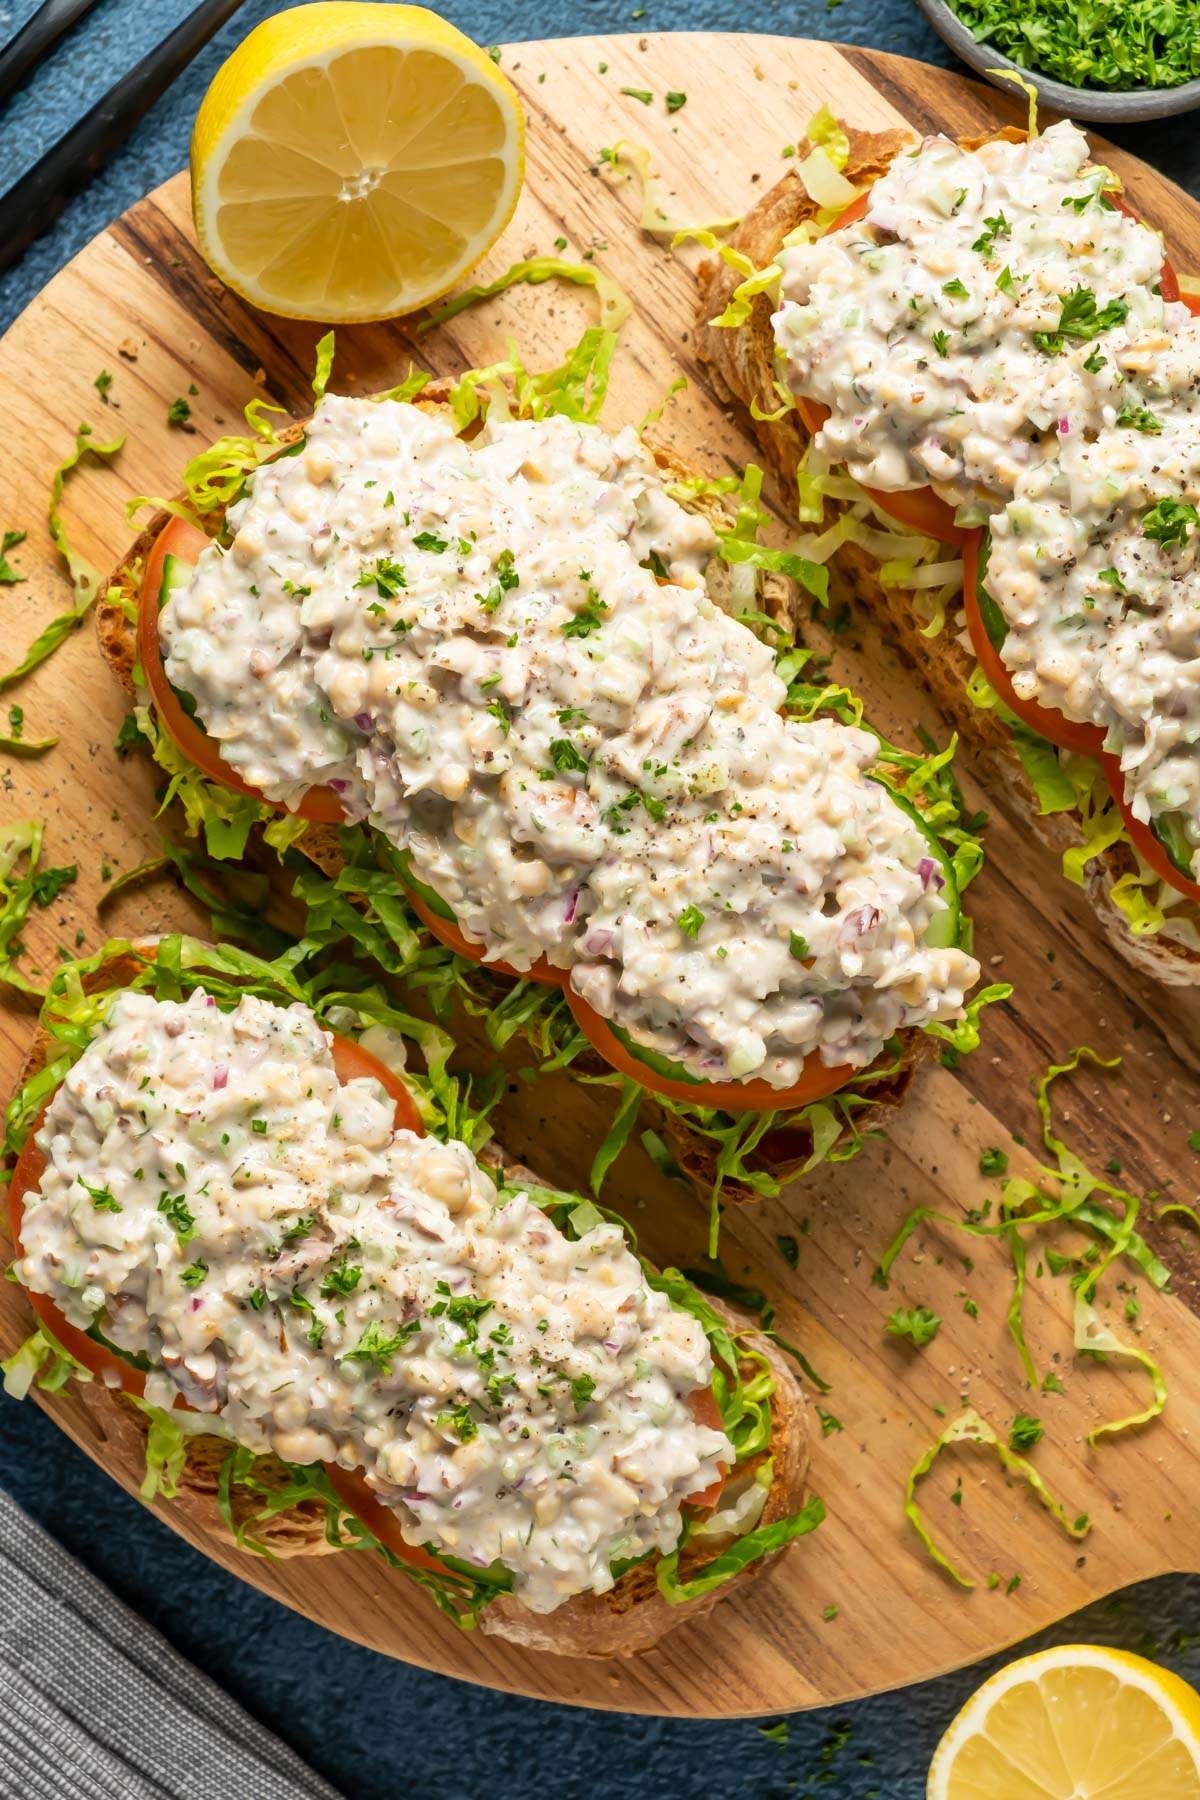 Chickpea chicken salad on open faced sandwiches. 